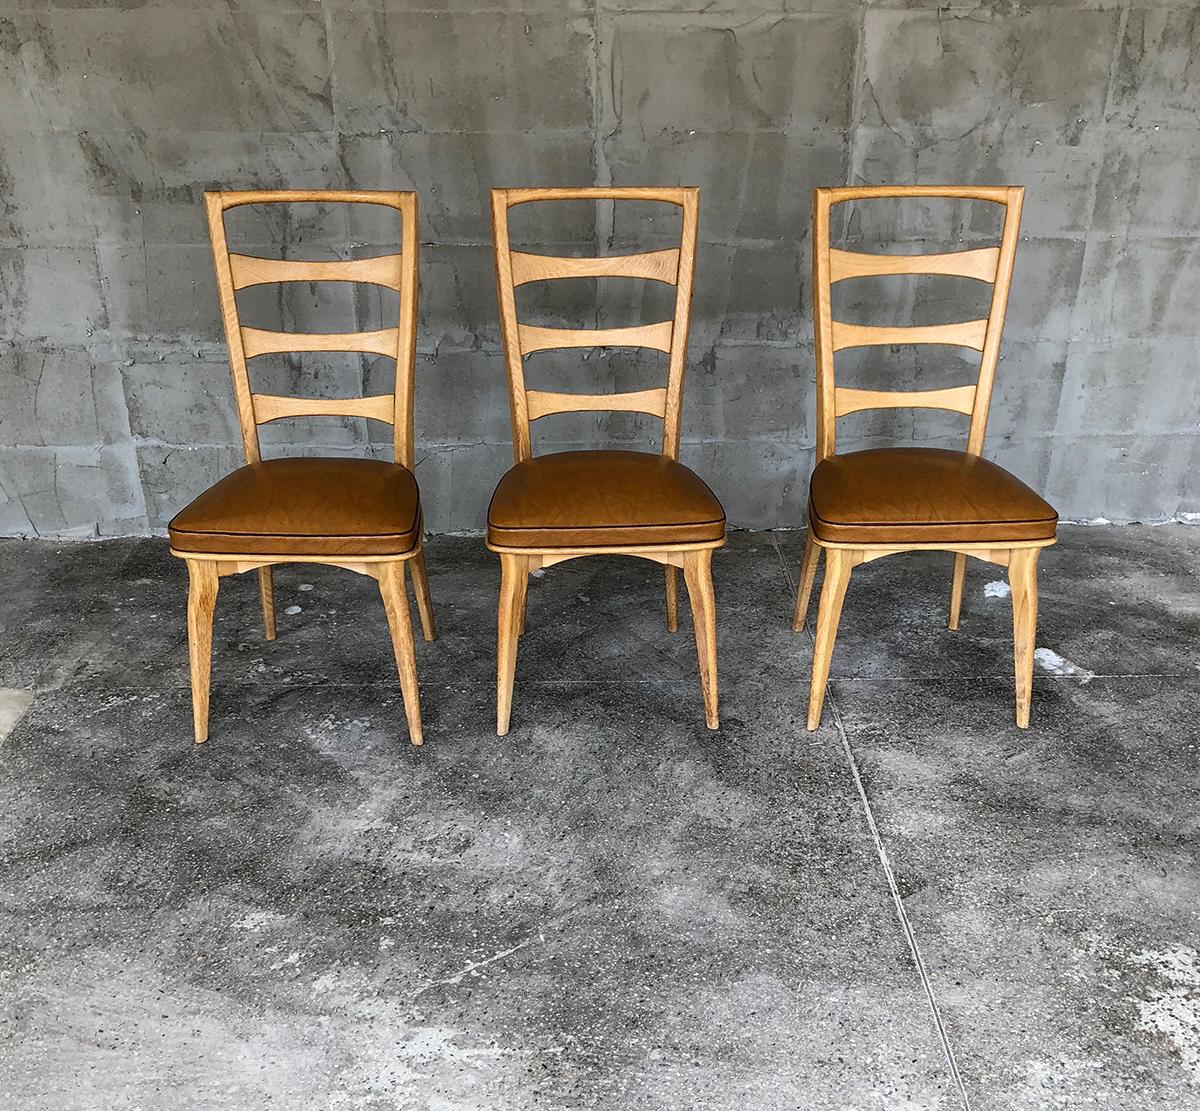 Lovely set of five French dining chairs by the famous French designer Gaston Poisson in oak tree and skai for the seats.